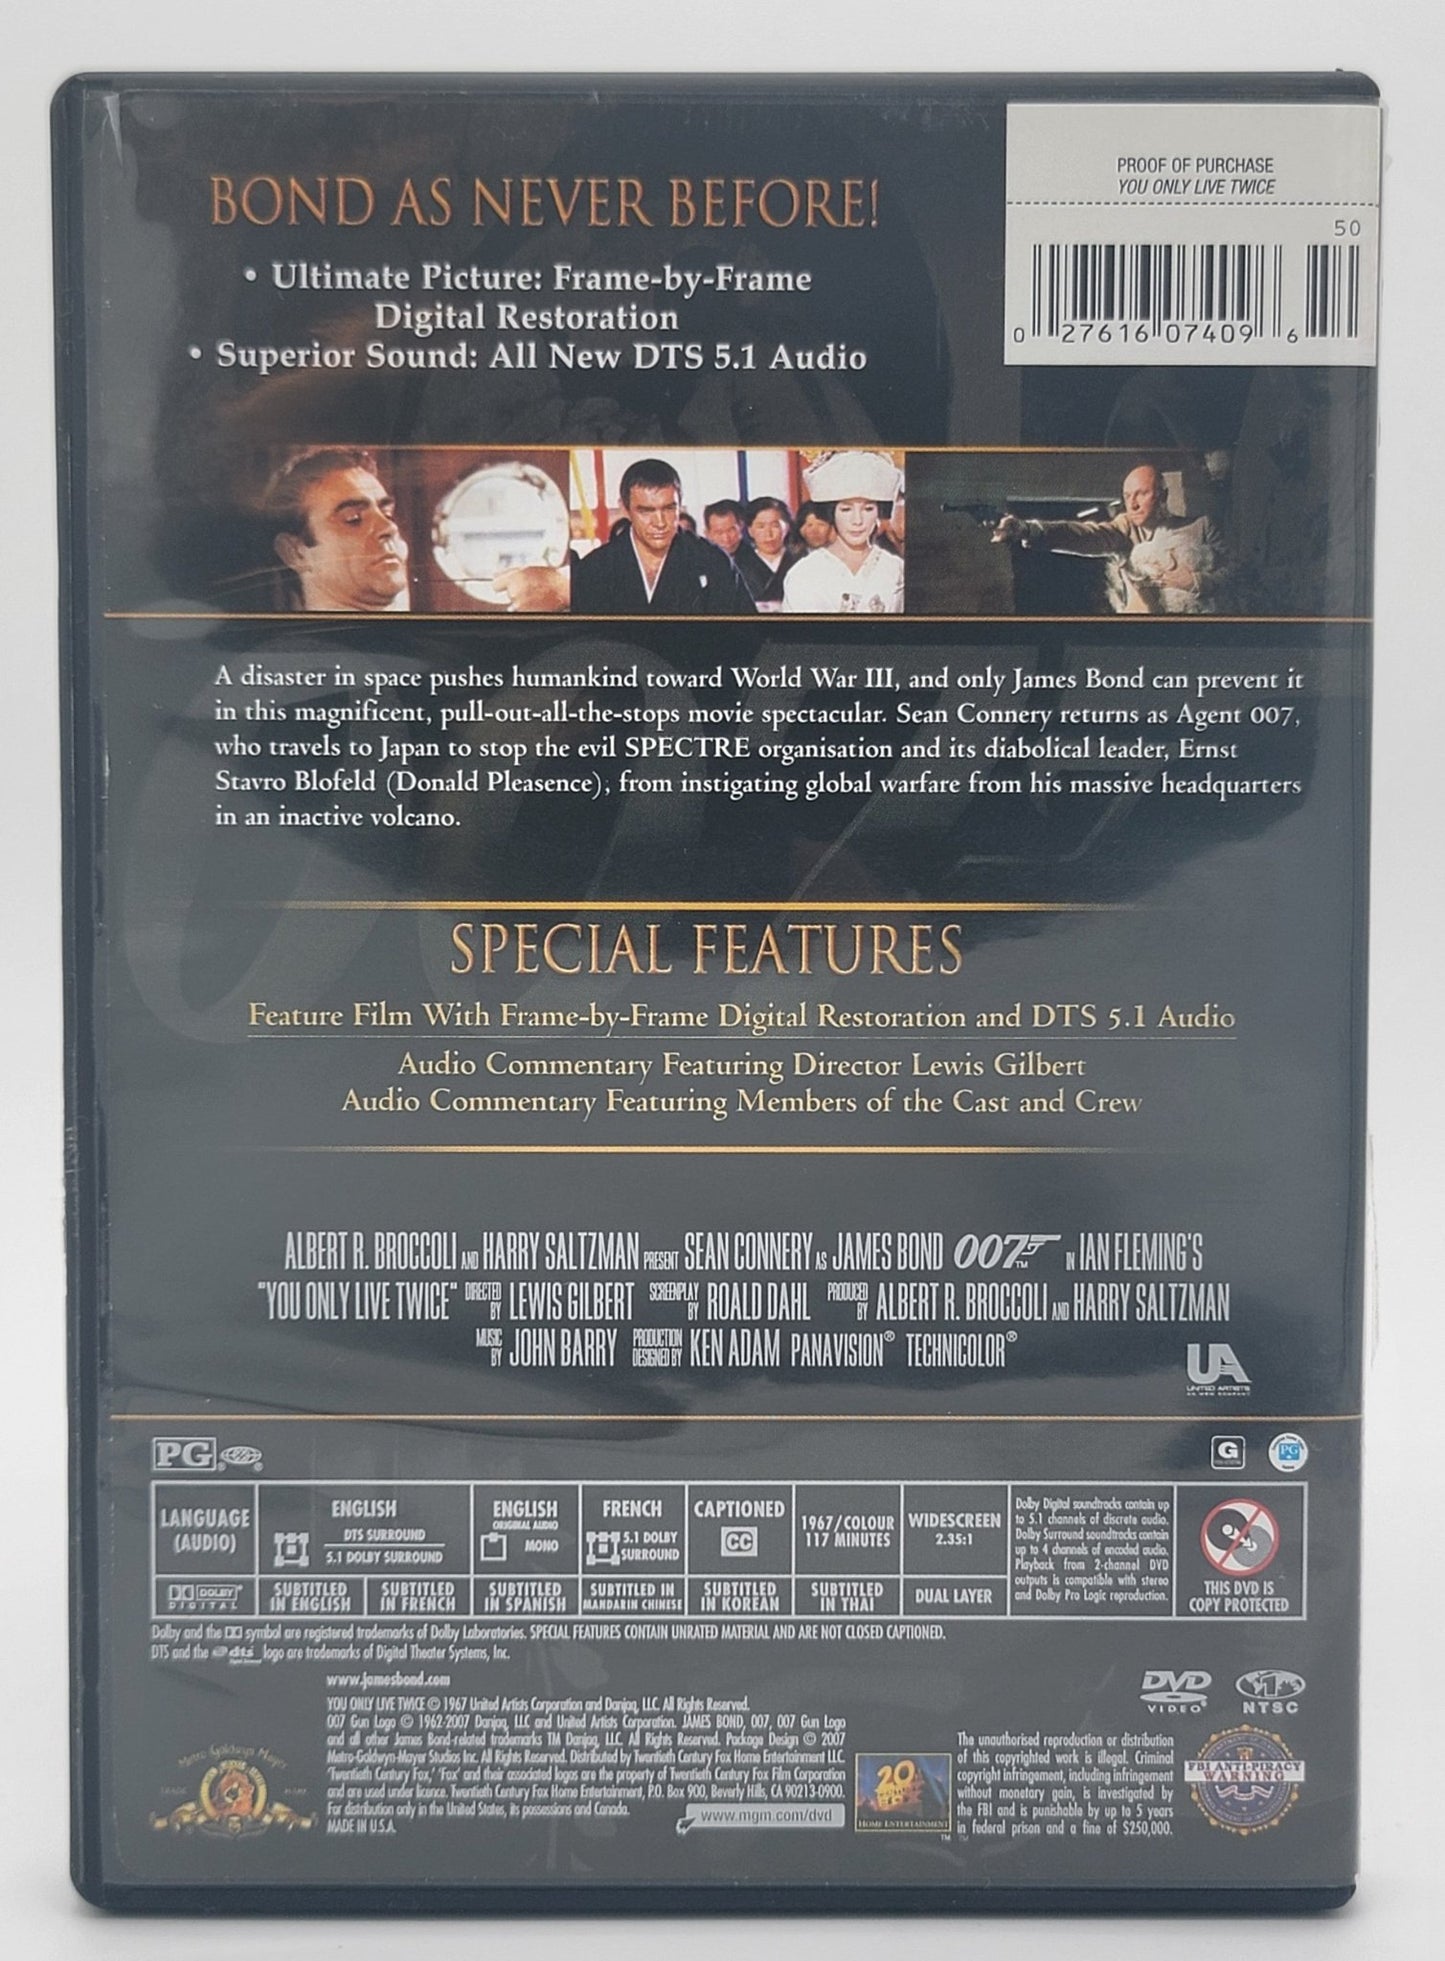 ‎ MGM Home Entertainment - James Bond 007 - You Only Live Twice | DVD | Widescreen - DVD - Steady Bunny Shop